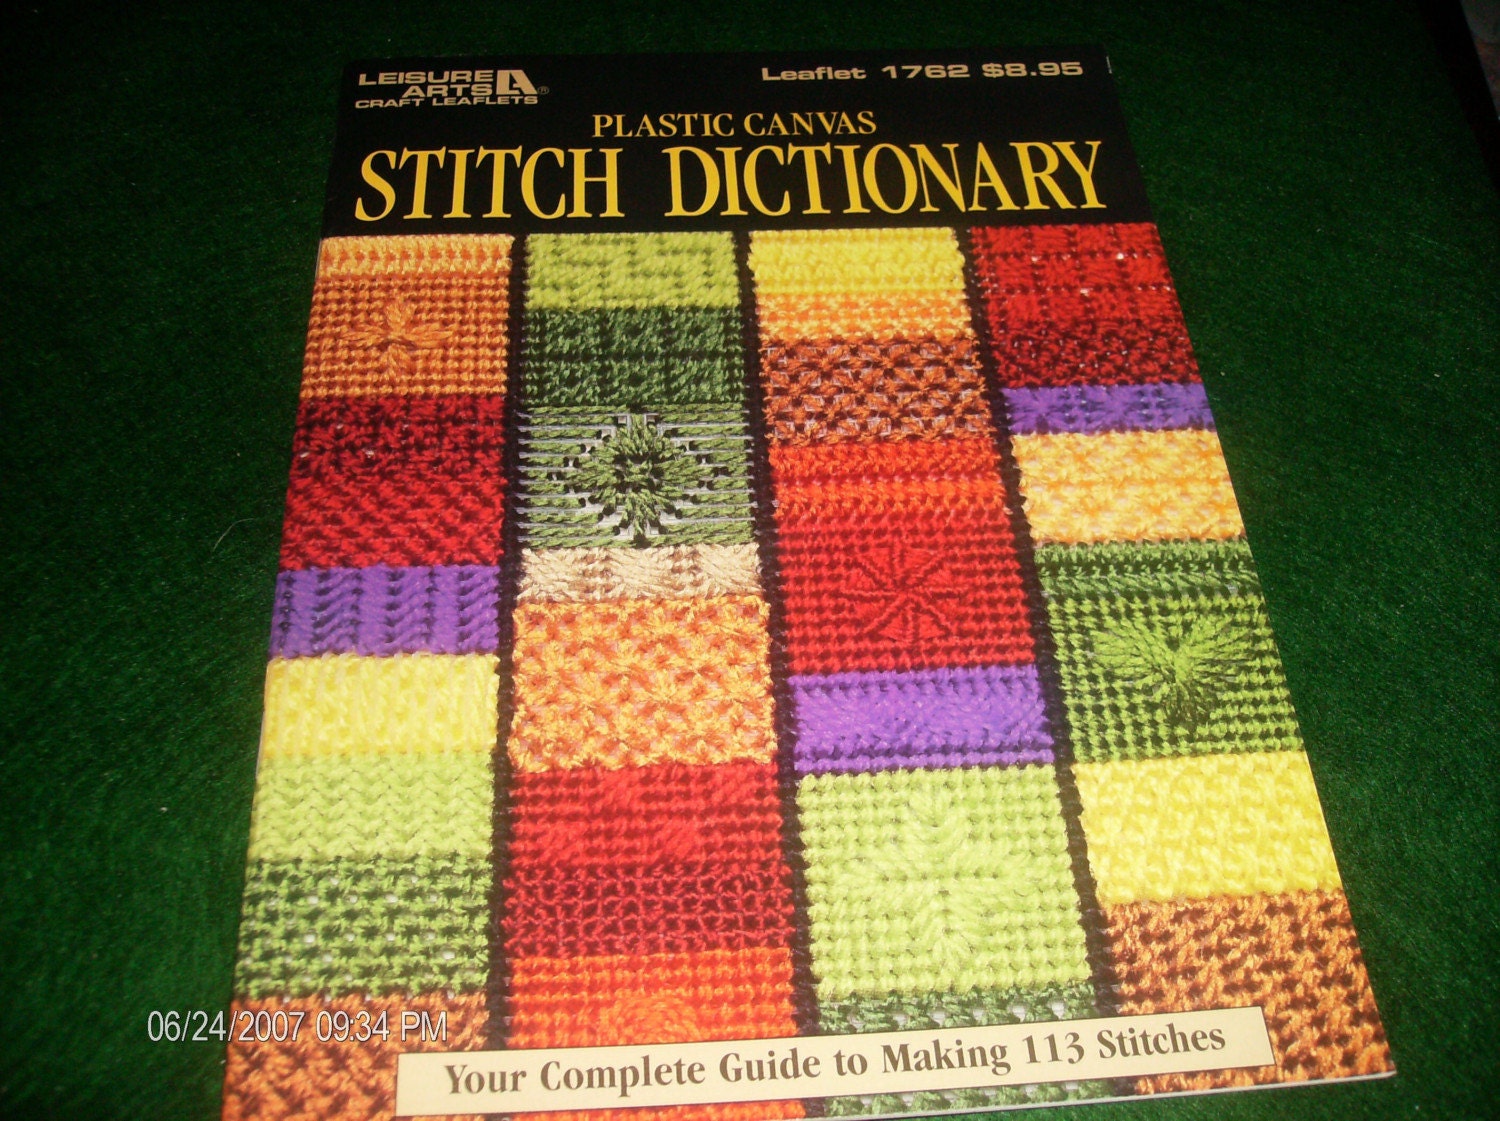 crochet from purses for bags plastic patterns Stitch Plastic Arts ClassyStitches by Leisure Canvas Dictionary